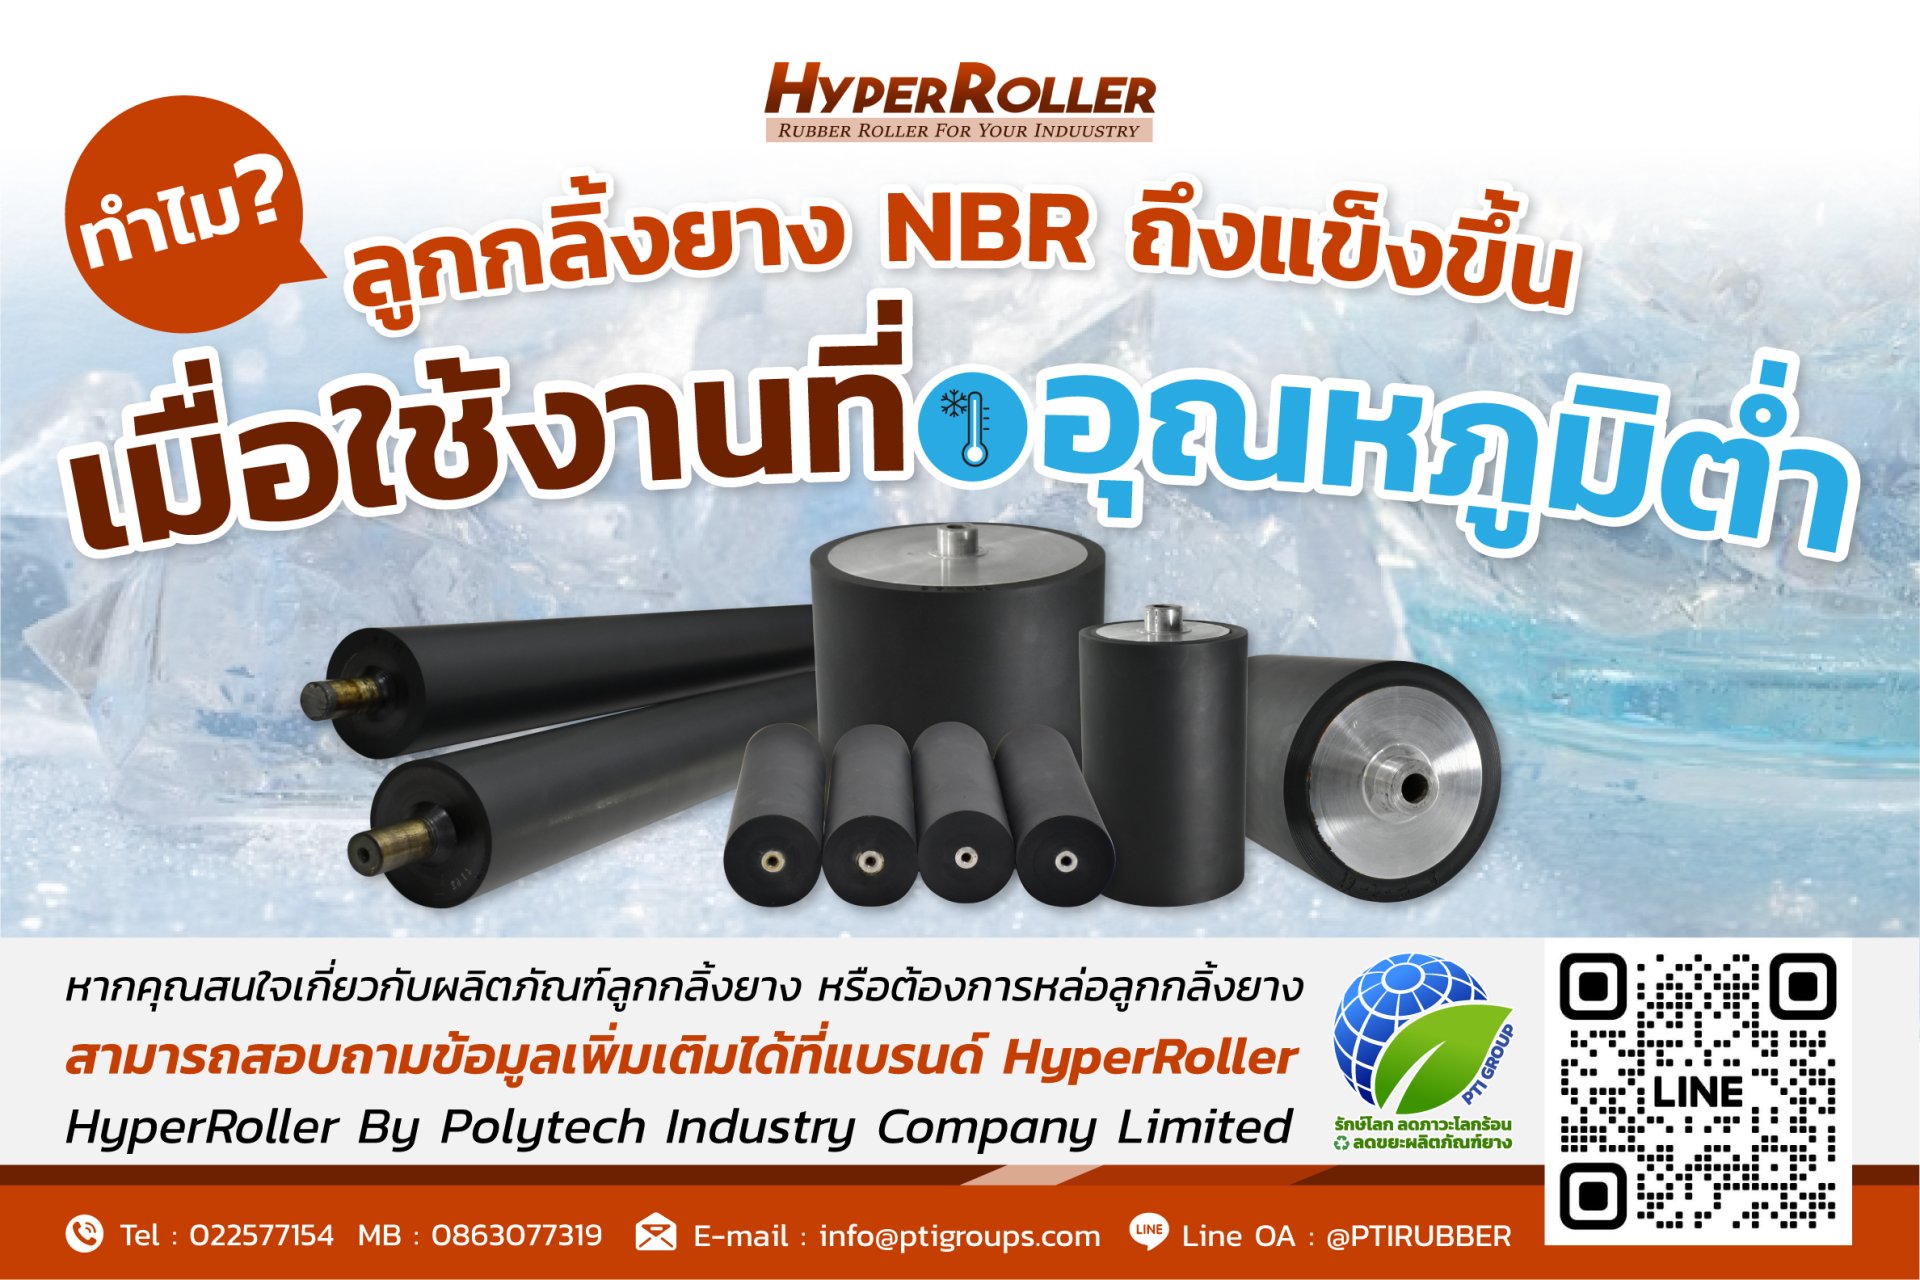 Why do NBR rubber rollers become harder when used at low temperatures?